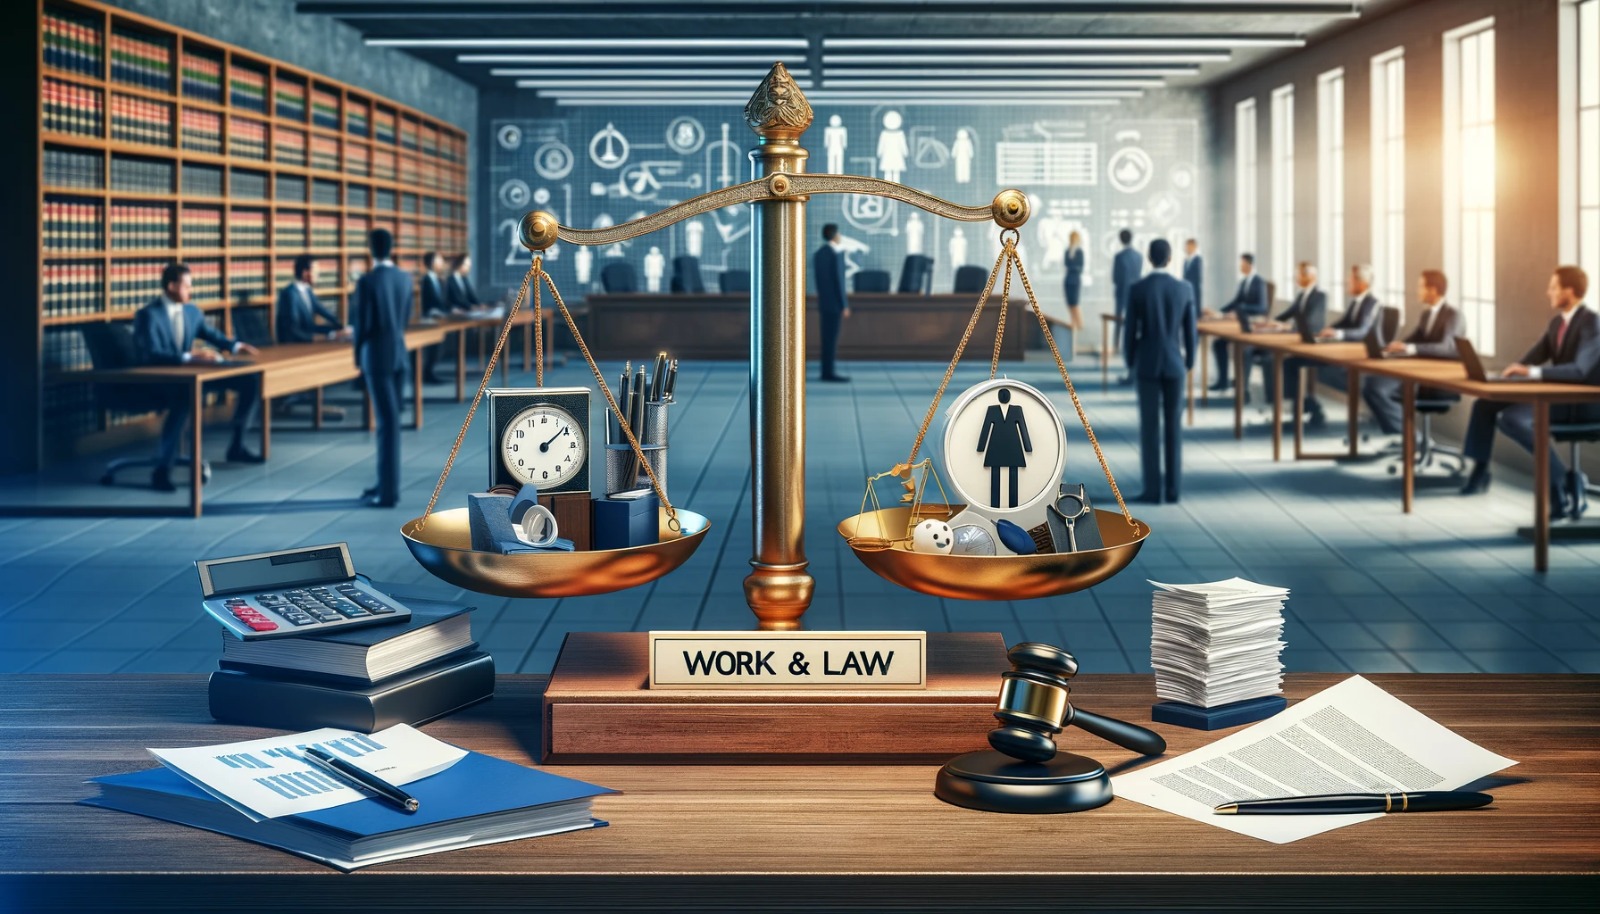 Scale of justice in a modern law office with legal books, a gavel, and items symbolizing work-life balance on the scales, with a plaque reading 